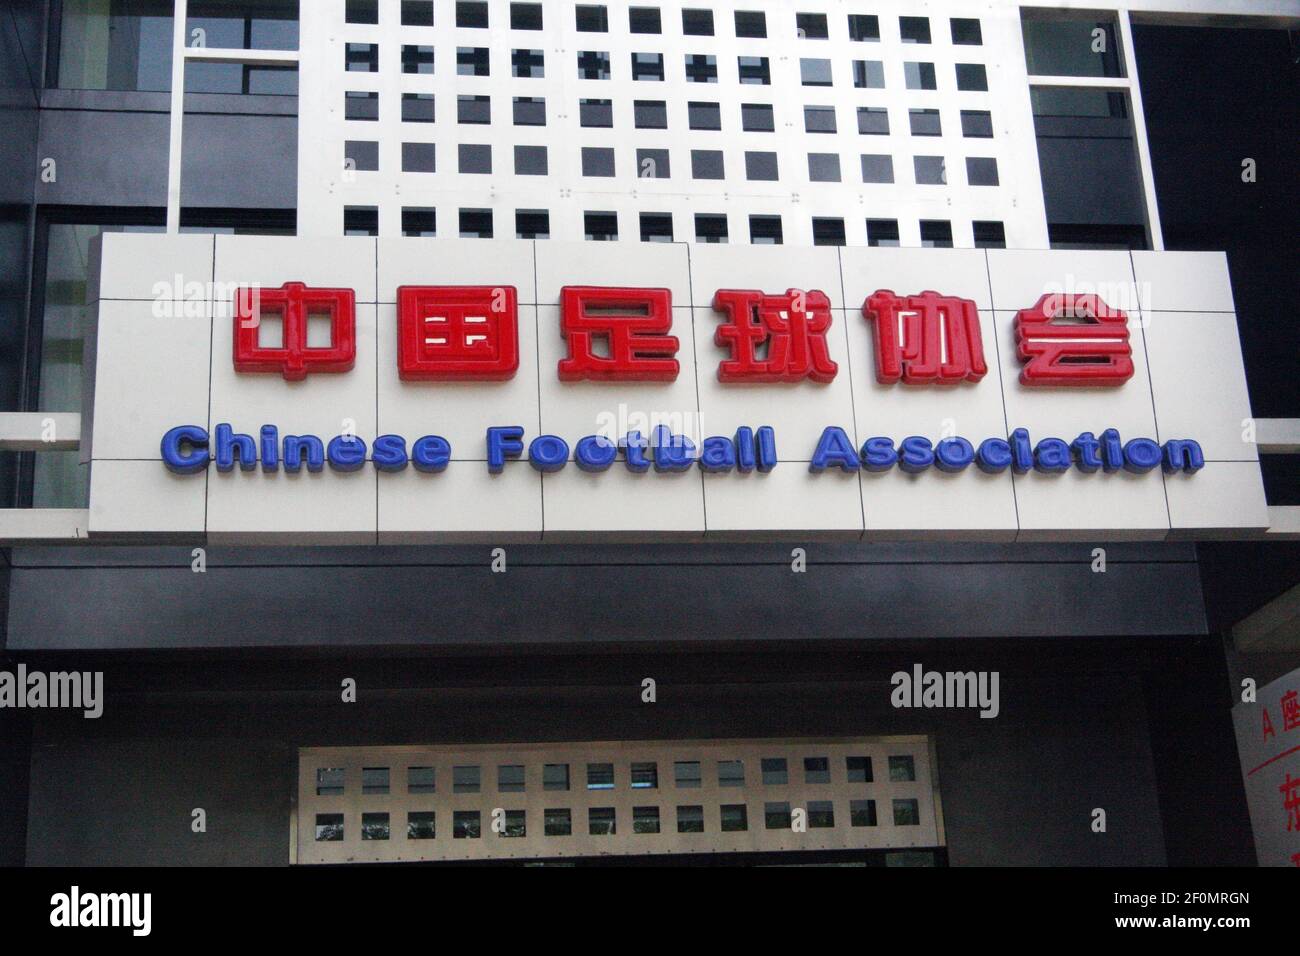 --FILE--The view of Chinese Football Association in Beijing, 21 August 2007. The Chinese Football Association (CFA) will hold its 11th membership conference at the National Football Training Center next Thursday to elect a new president, vice presidents and executive committee, the CFA announced in Beijing, China, 16 August 2019. The notice released by the CFA said that 'the conference will also revise the CFA Statutes and review a CFA working report.' (Photo by Huang Bo - Imaginechina/Sipa USA) Stock Photo